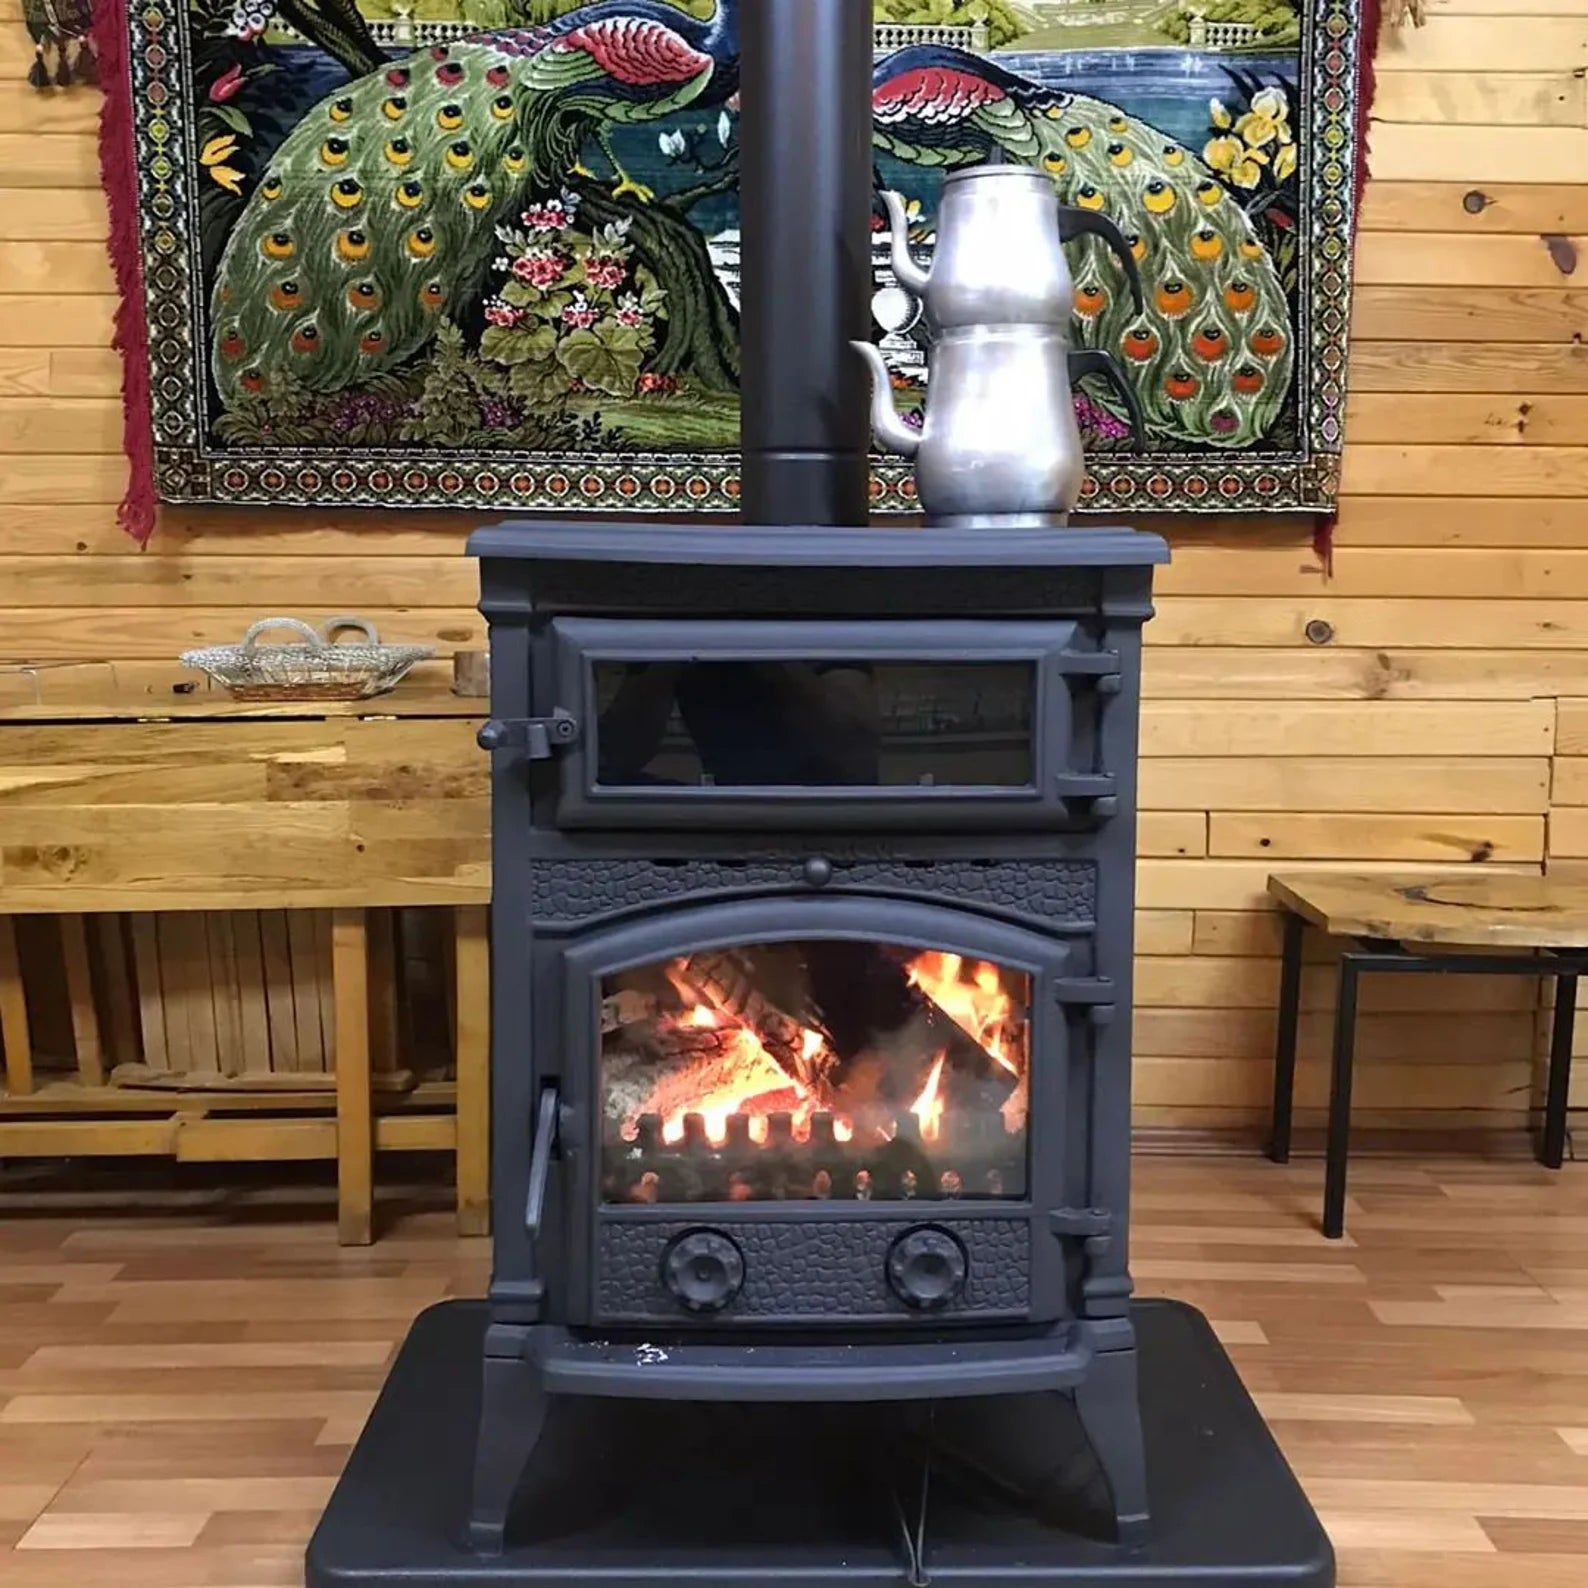  Cast iron wood stove with oven, wood burning stove